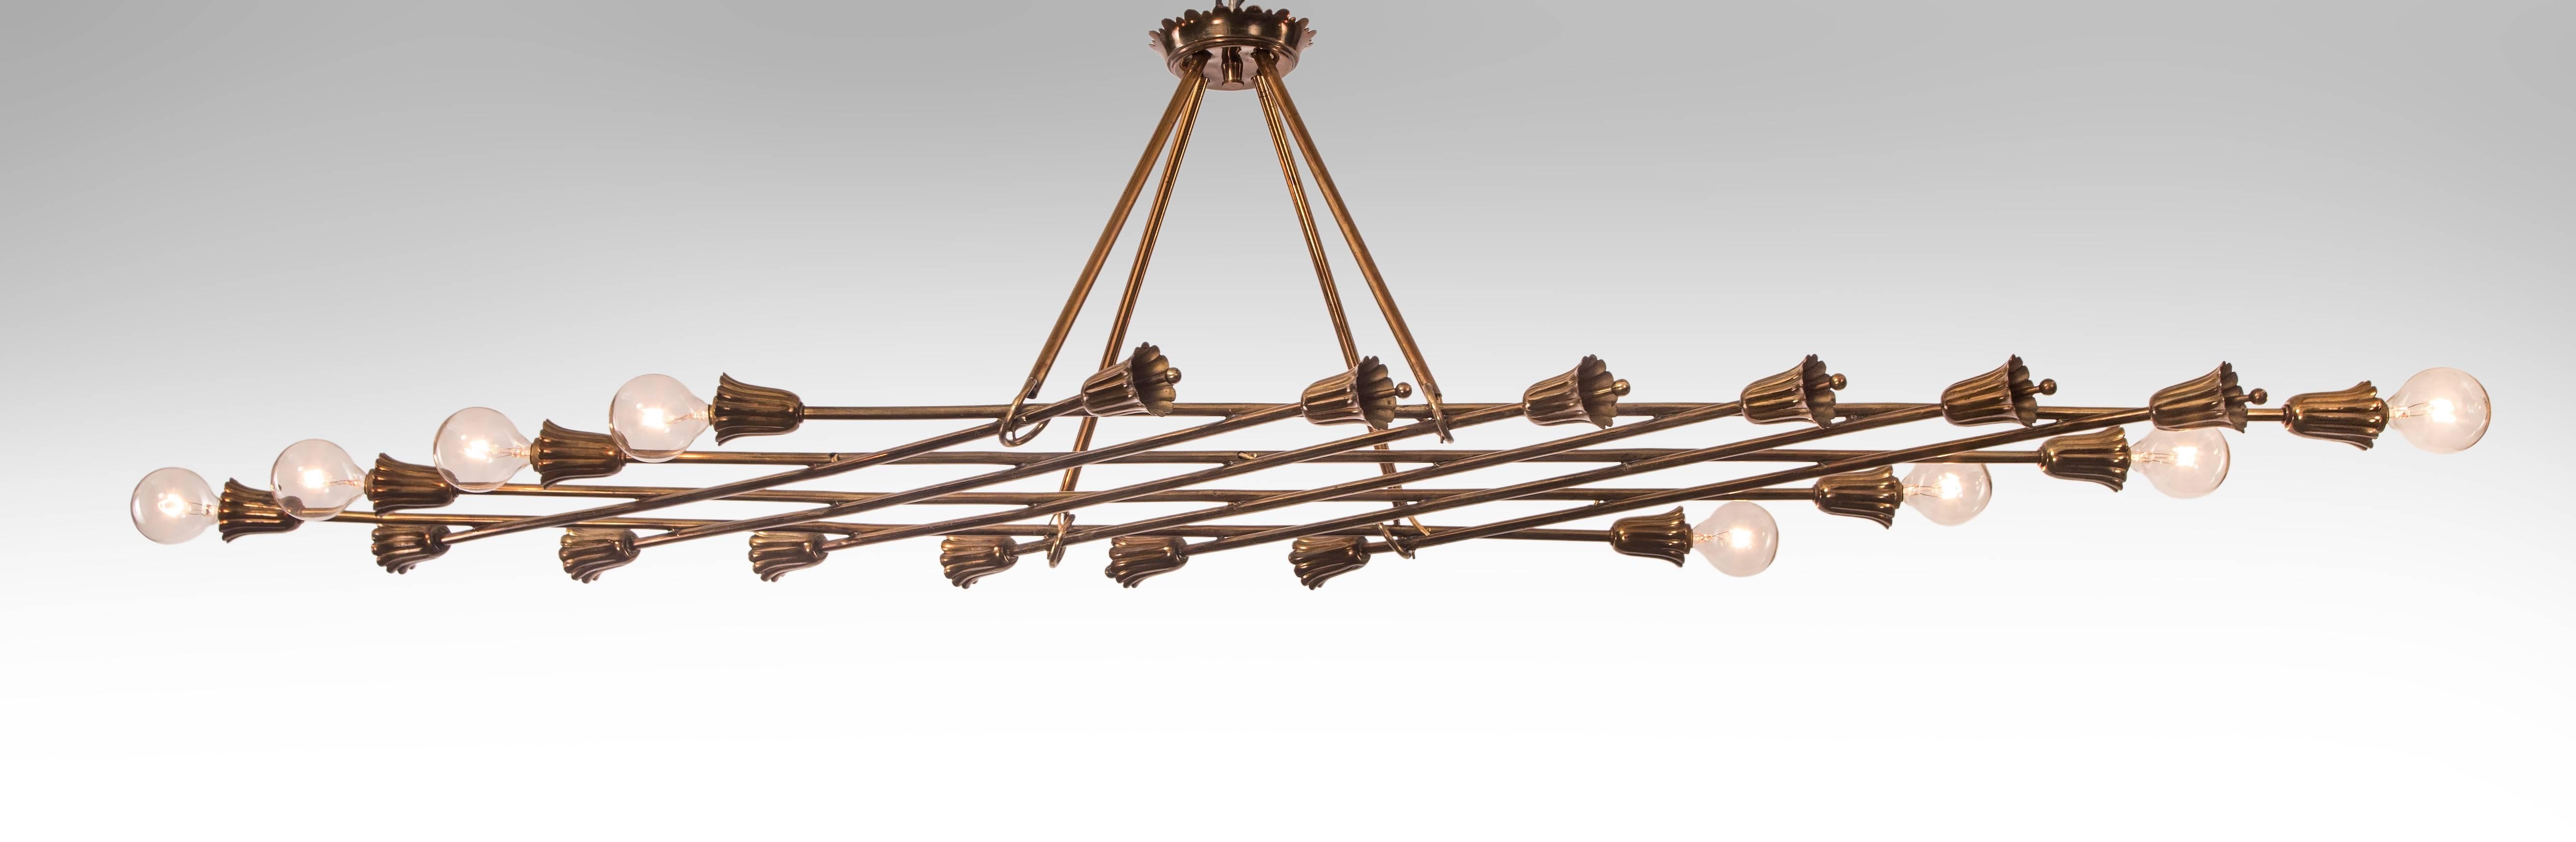 The crown shaped canopy, above four hanging rods suspending a latticework of brass tubes, terminating in blossoms with stamens and eight flower-shaped light holders.